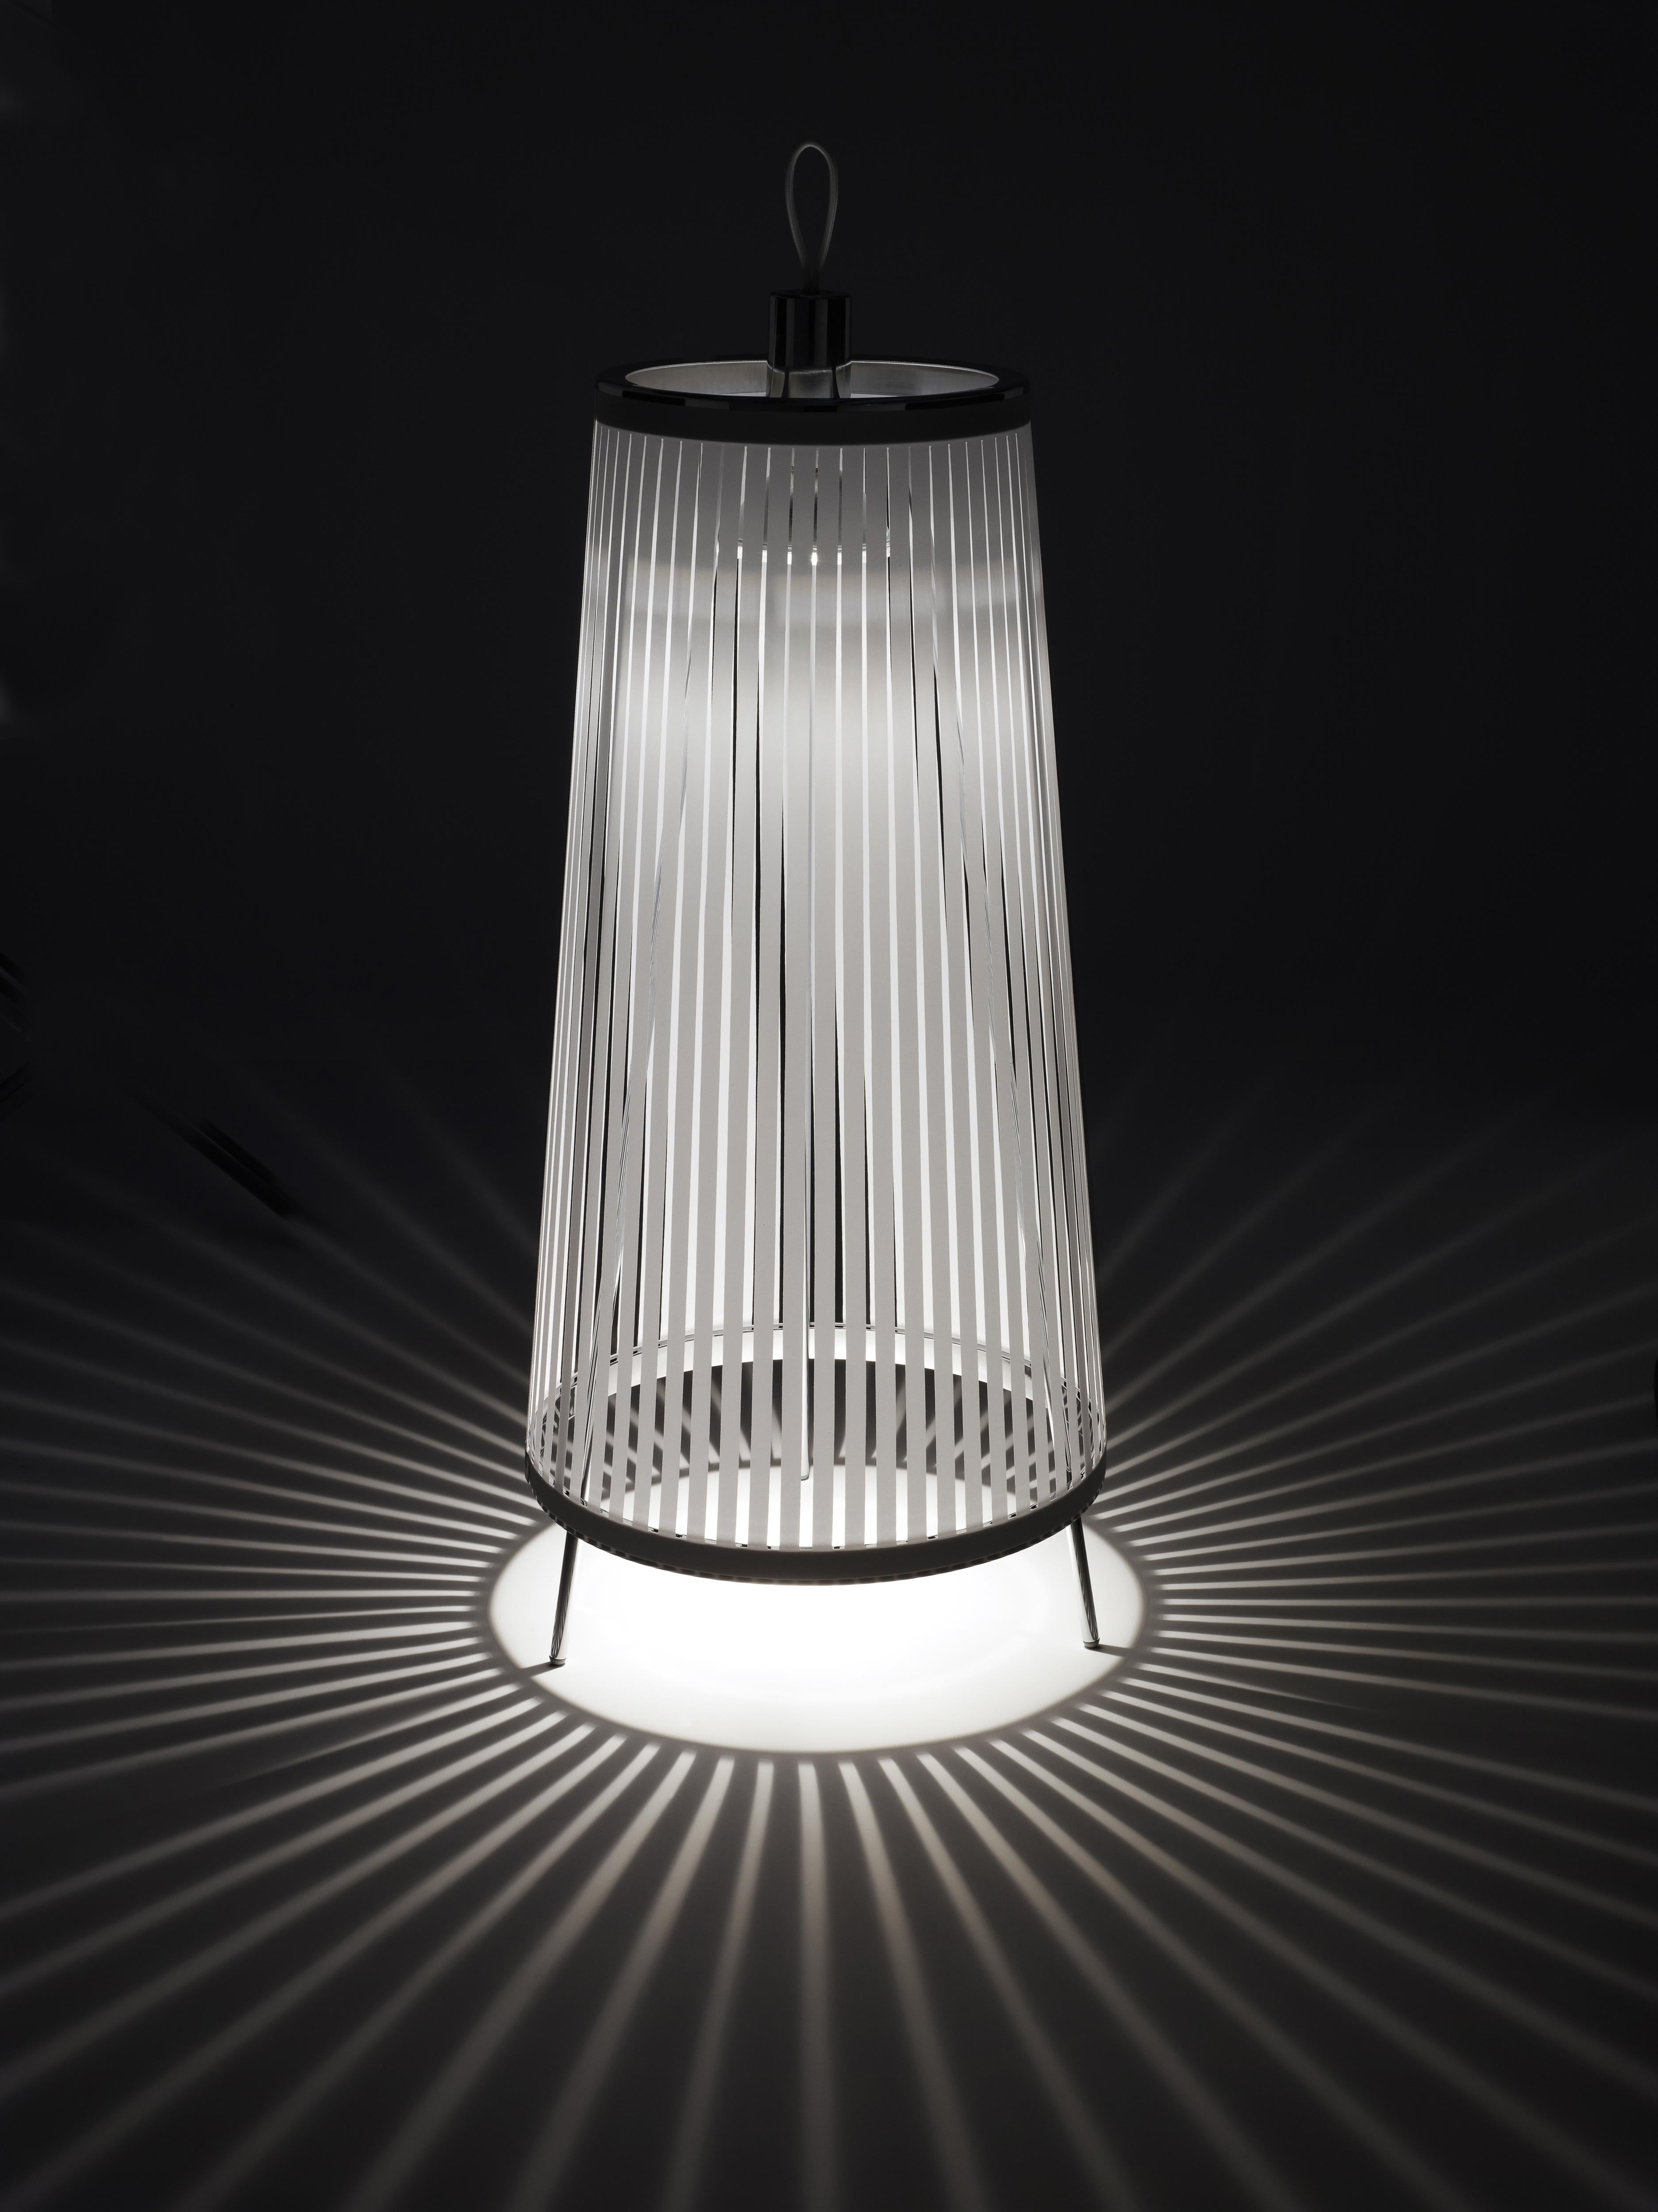 Solis is an innovatively simple and elegant suspension lamp that can be used as a pendant, hung from a wall, or as a freestanding portable luminaire to create a distinctive ambiance. The resulting piece is an engaging blend of light and shadow,